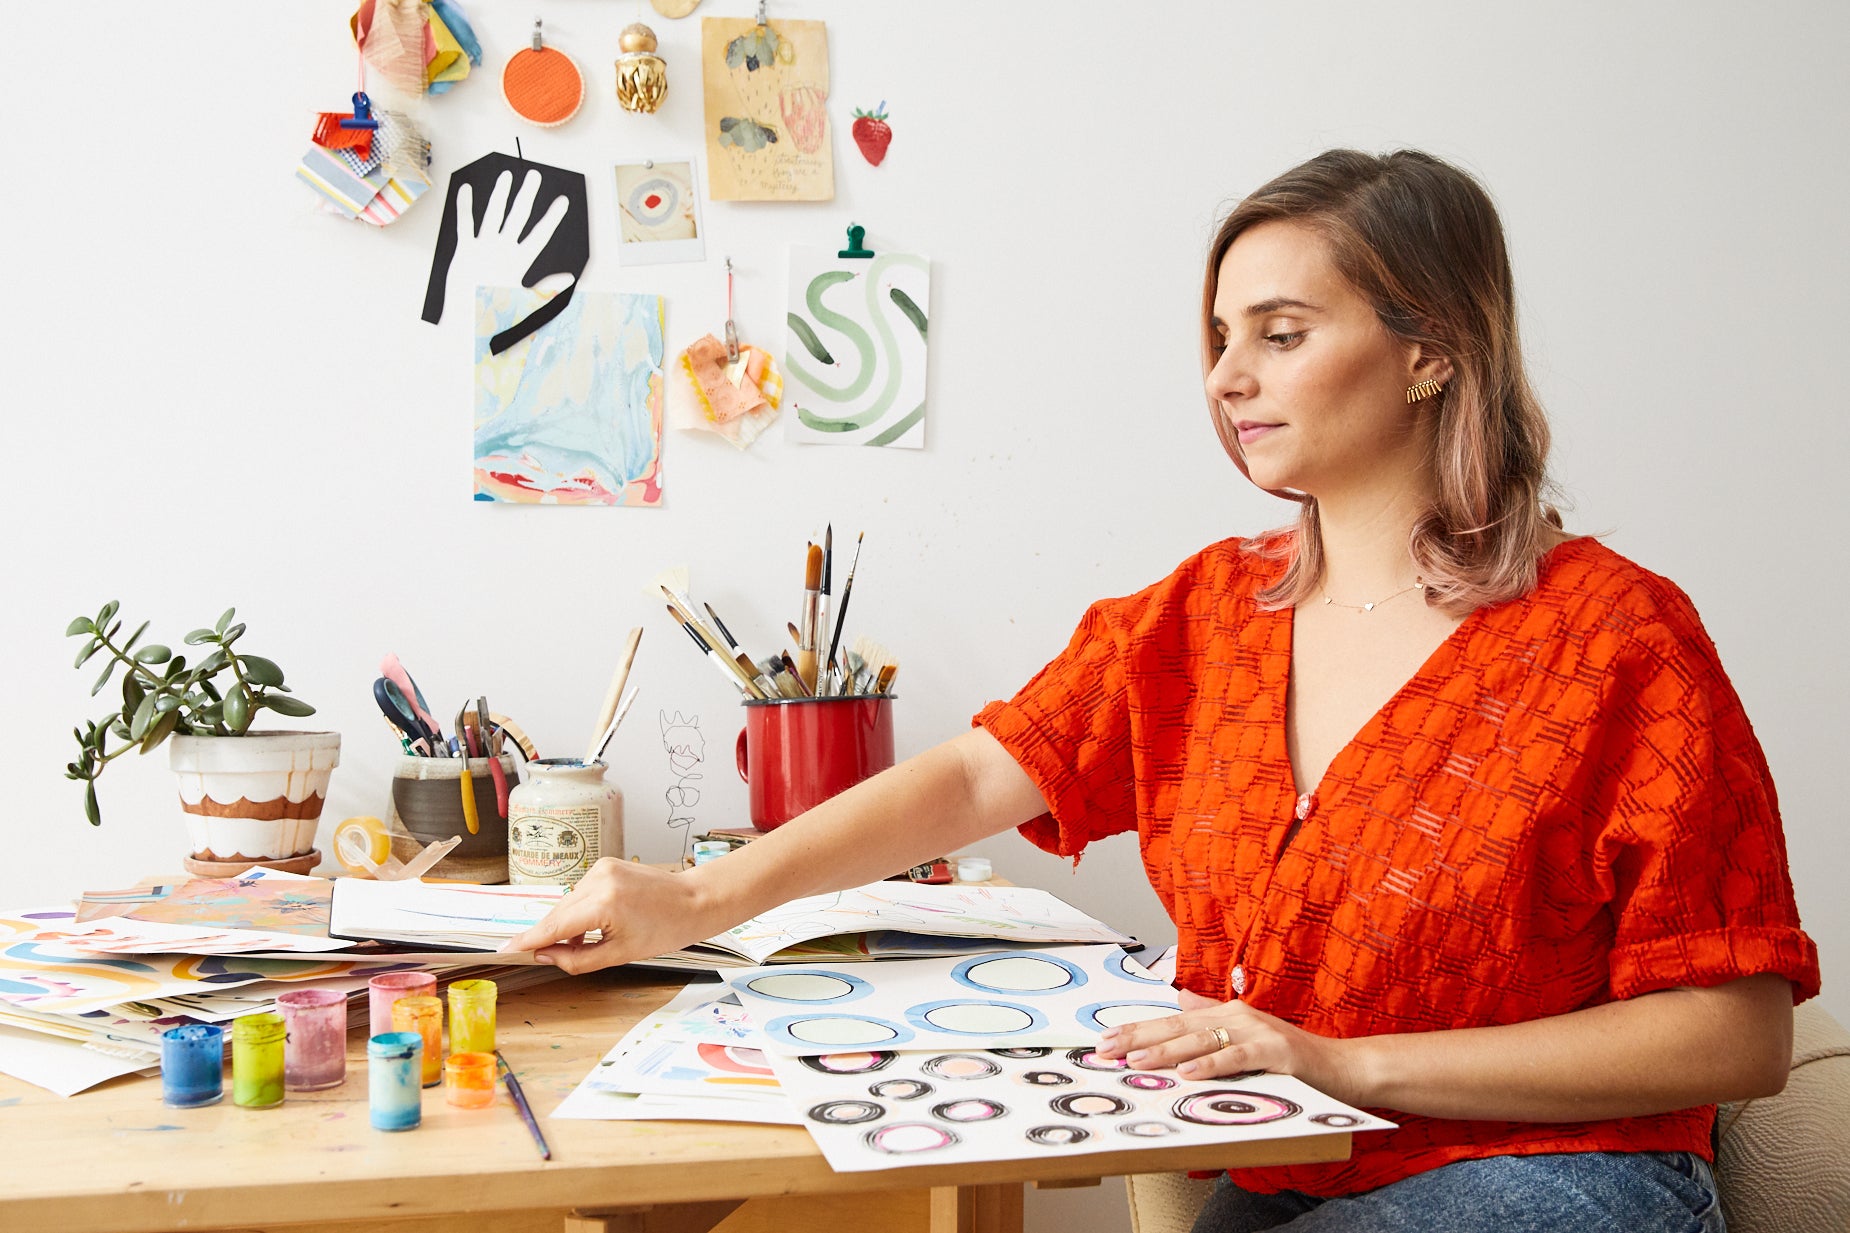 Brunette woman sitting at a desk with her watercolor artwork on the table and paint brush cans and whimsical artwork hanging on the wall